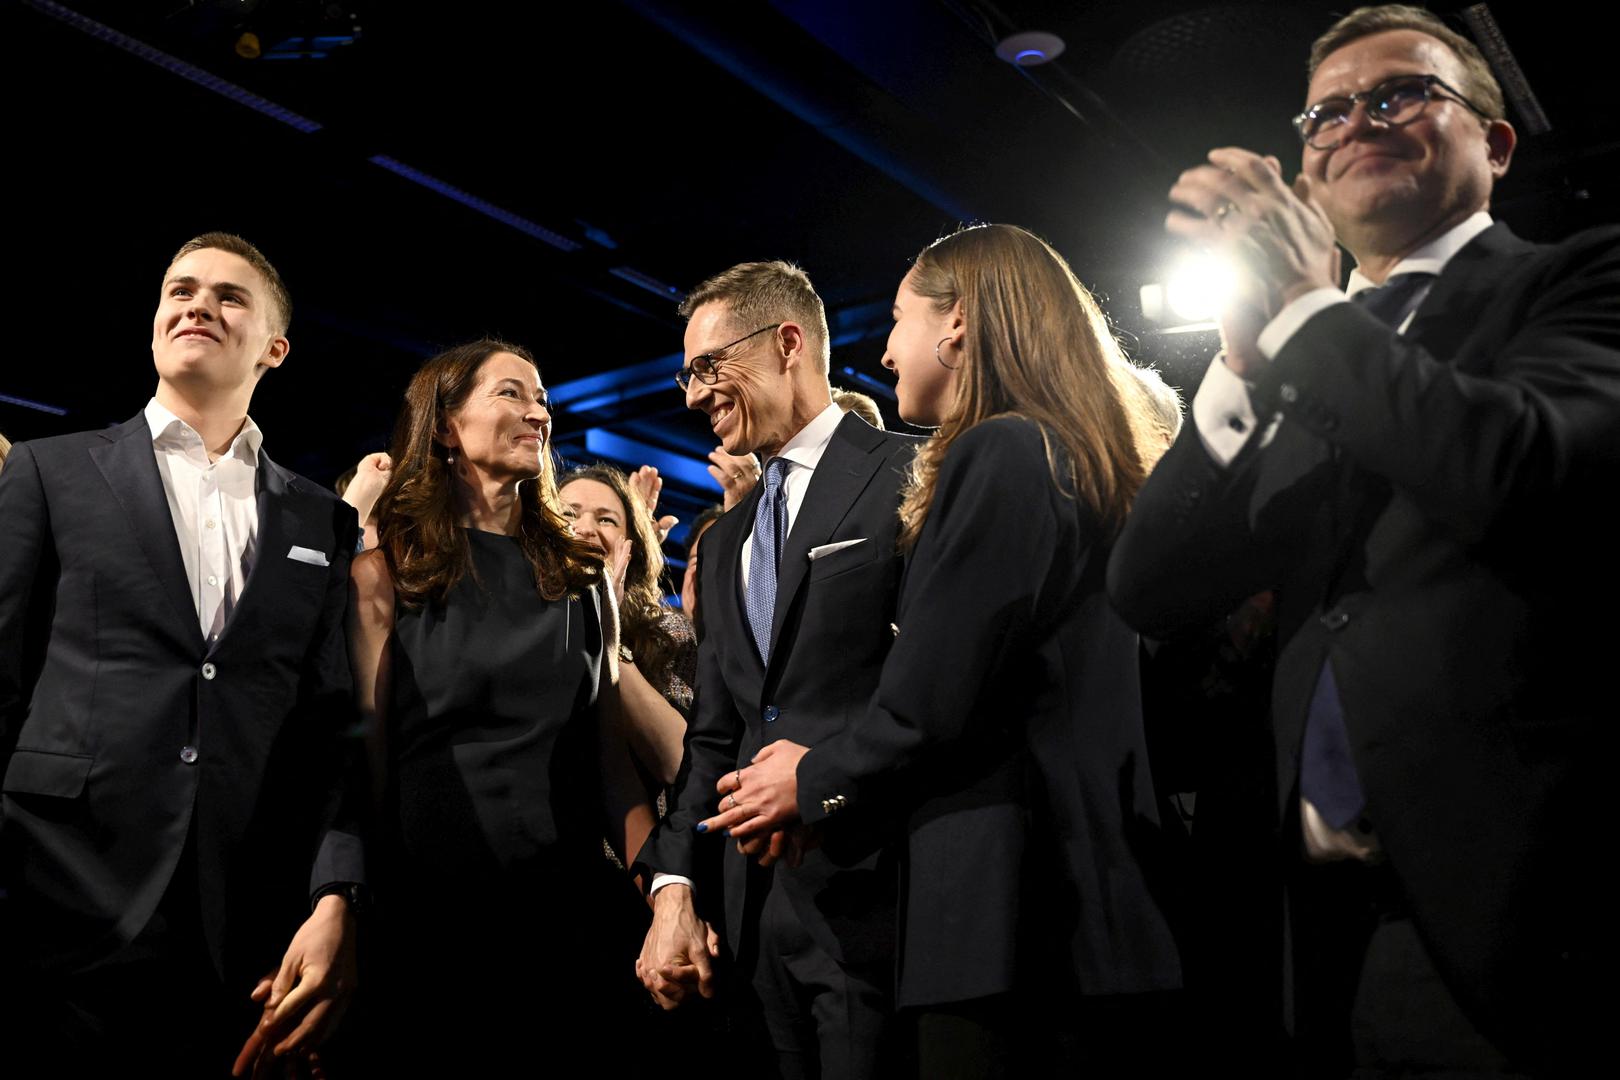 National Coalition Party (NCP) presidential candidate Alexander Stubb reacts to the results of the advance votes, flanked by his son Oliver, wife Suzanne Innes-Stubb, daughter Emilie, and Finnish Prime Minister Petteri Orpo, at his election reception in Helsinki, Finland, February 11, 2024. Lehtikuva/Emmi Korhonen via REUTERS ATTENTION EDITORS - THIS IMAGE WAS PROVIDED BY A THIRD PARTY. NO THIRD PARTY SALES. NOT FOR USE BY REUTERS THIRD PARTY DISTRIBUTORS. FINLAND OUT. NO COMMERCIAL OR EDITORIAL SALES IN FINLAND. Photo: LEHTIKUVA/REUTERS